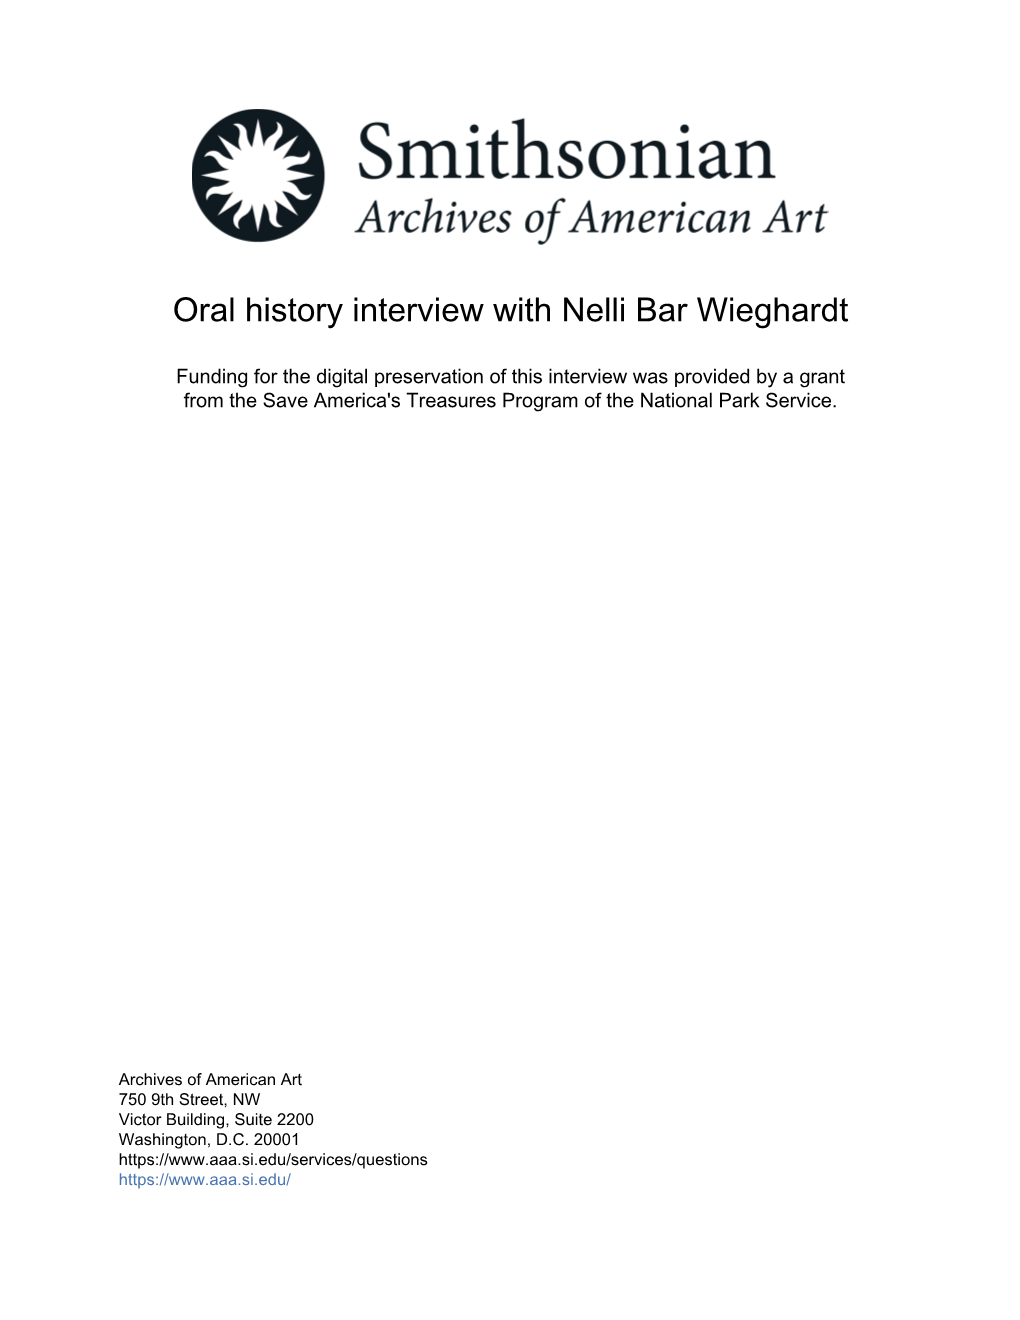 Oral History Interview with Nelli Bar Wieghardt